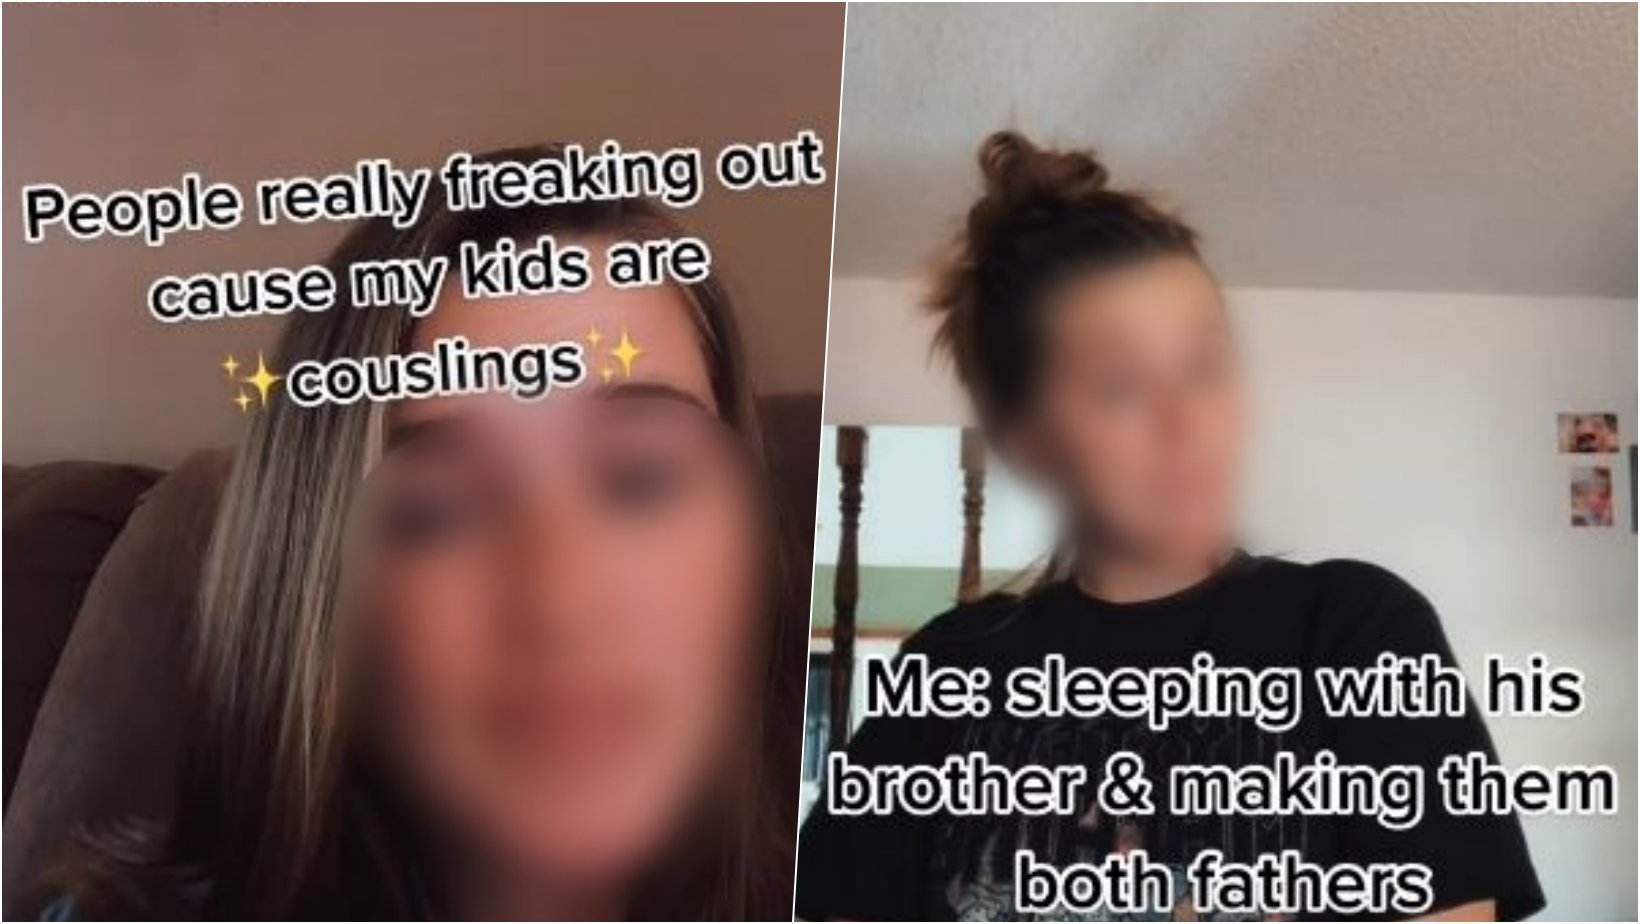 6 facebook cover 2.jpg?resize=412,232 - Mom Reveals Her Kids Are “Couslings” After Having A Baby With Her Cheating Ex Boyfriend’s Brother For Revenge